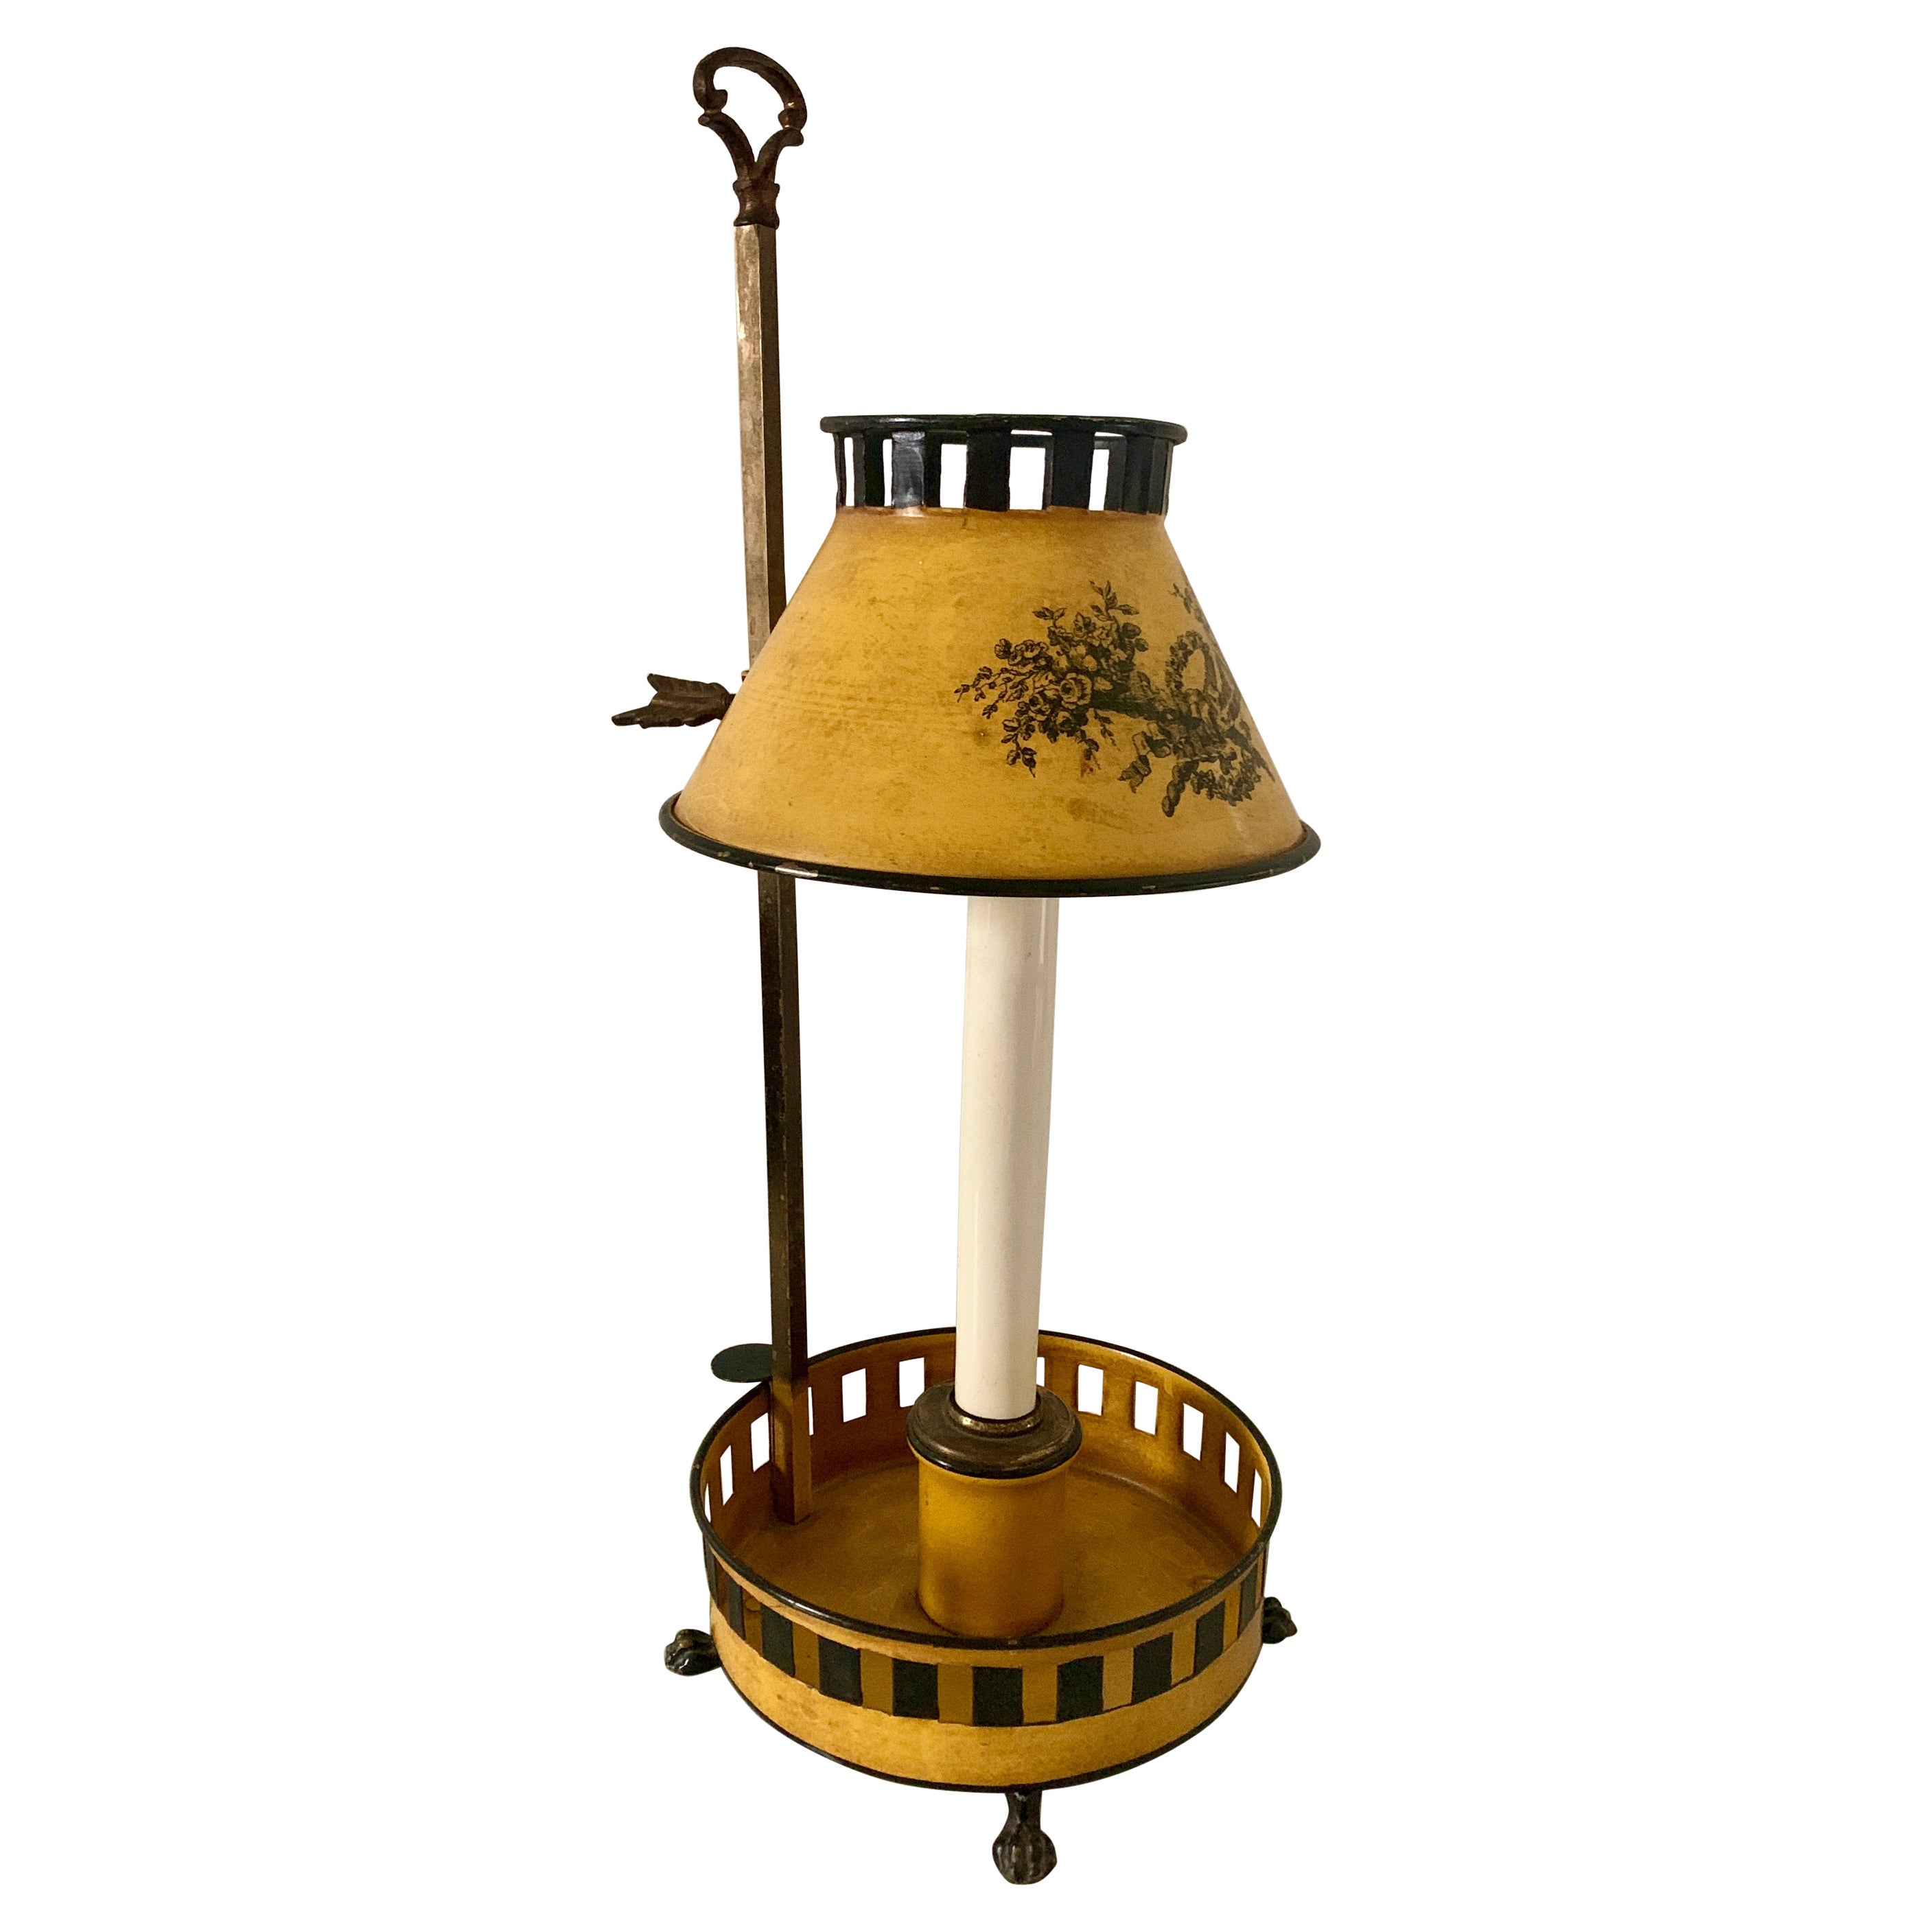 French Provincial Yellow and Black Tole Bouillotte Lamp